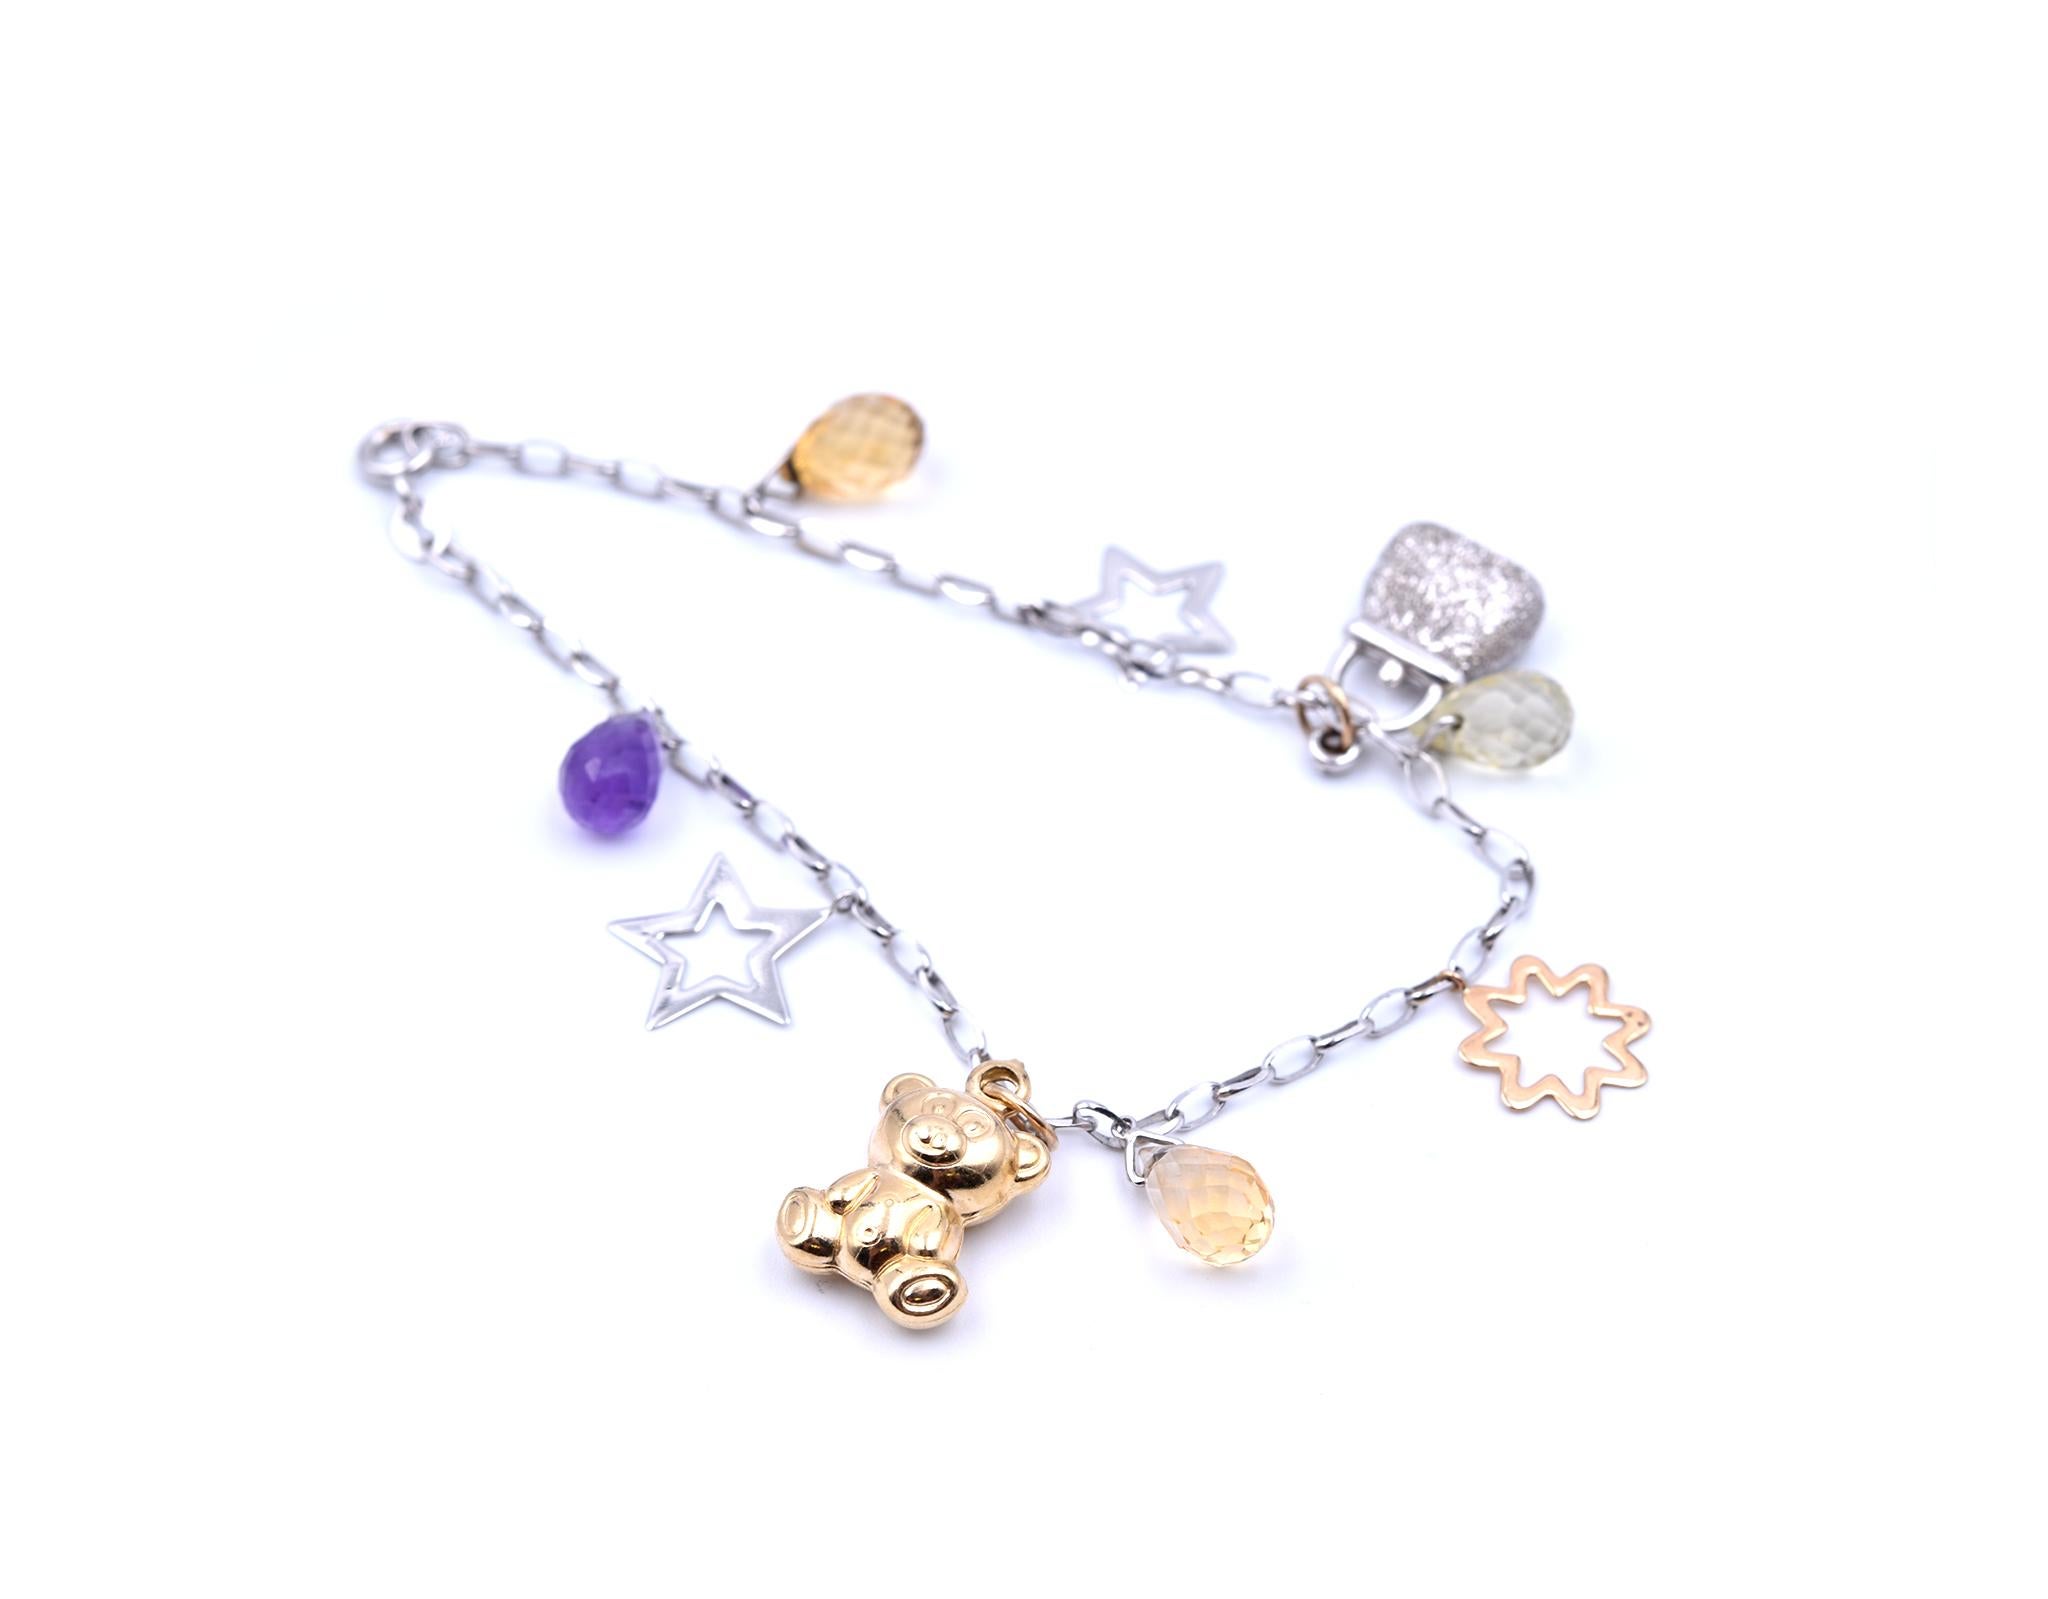 Designer: custom design
Material: 14k white & yellow gold
Gemstone: citrine, amethyst and prasiolite
Charms: star, purse, flower and teddy bear
Dimensions: bracelet is 6 3/4-inch long, each charm drops 1/2-inch
Weight: 6.05 grams
